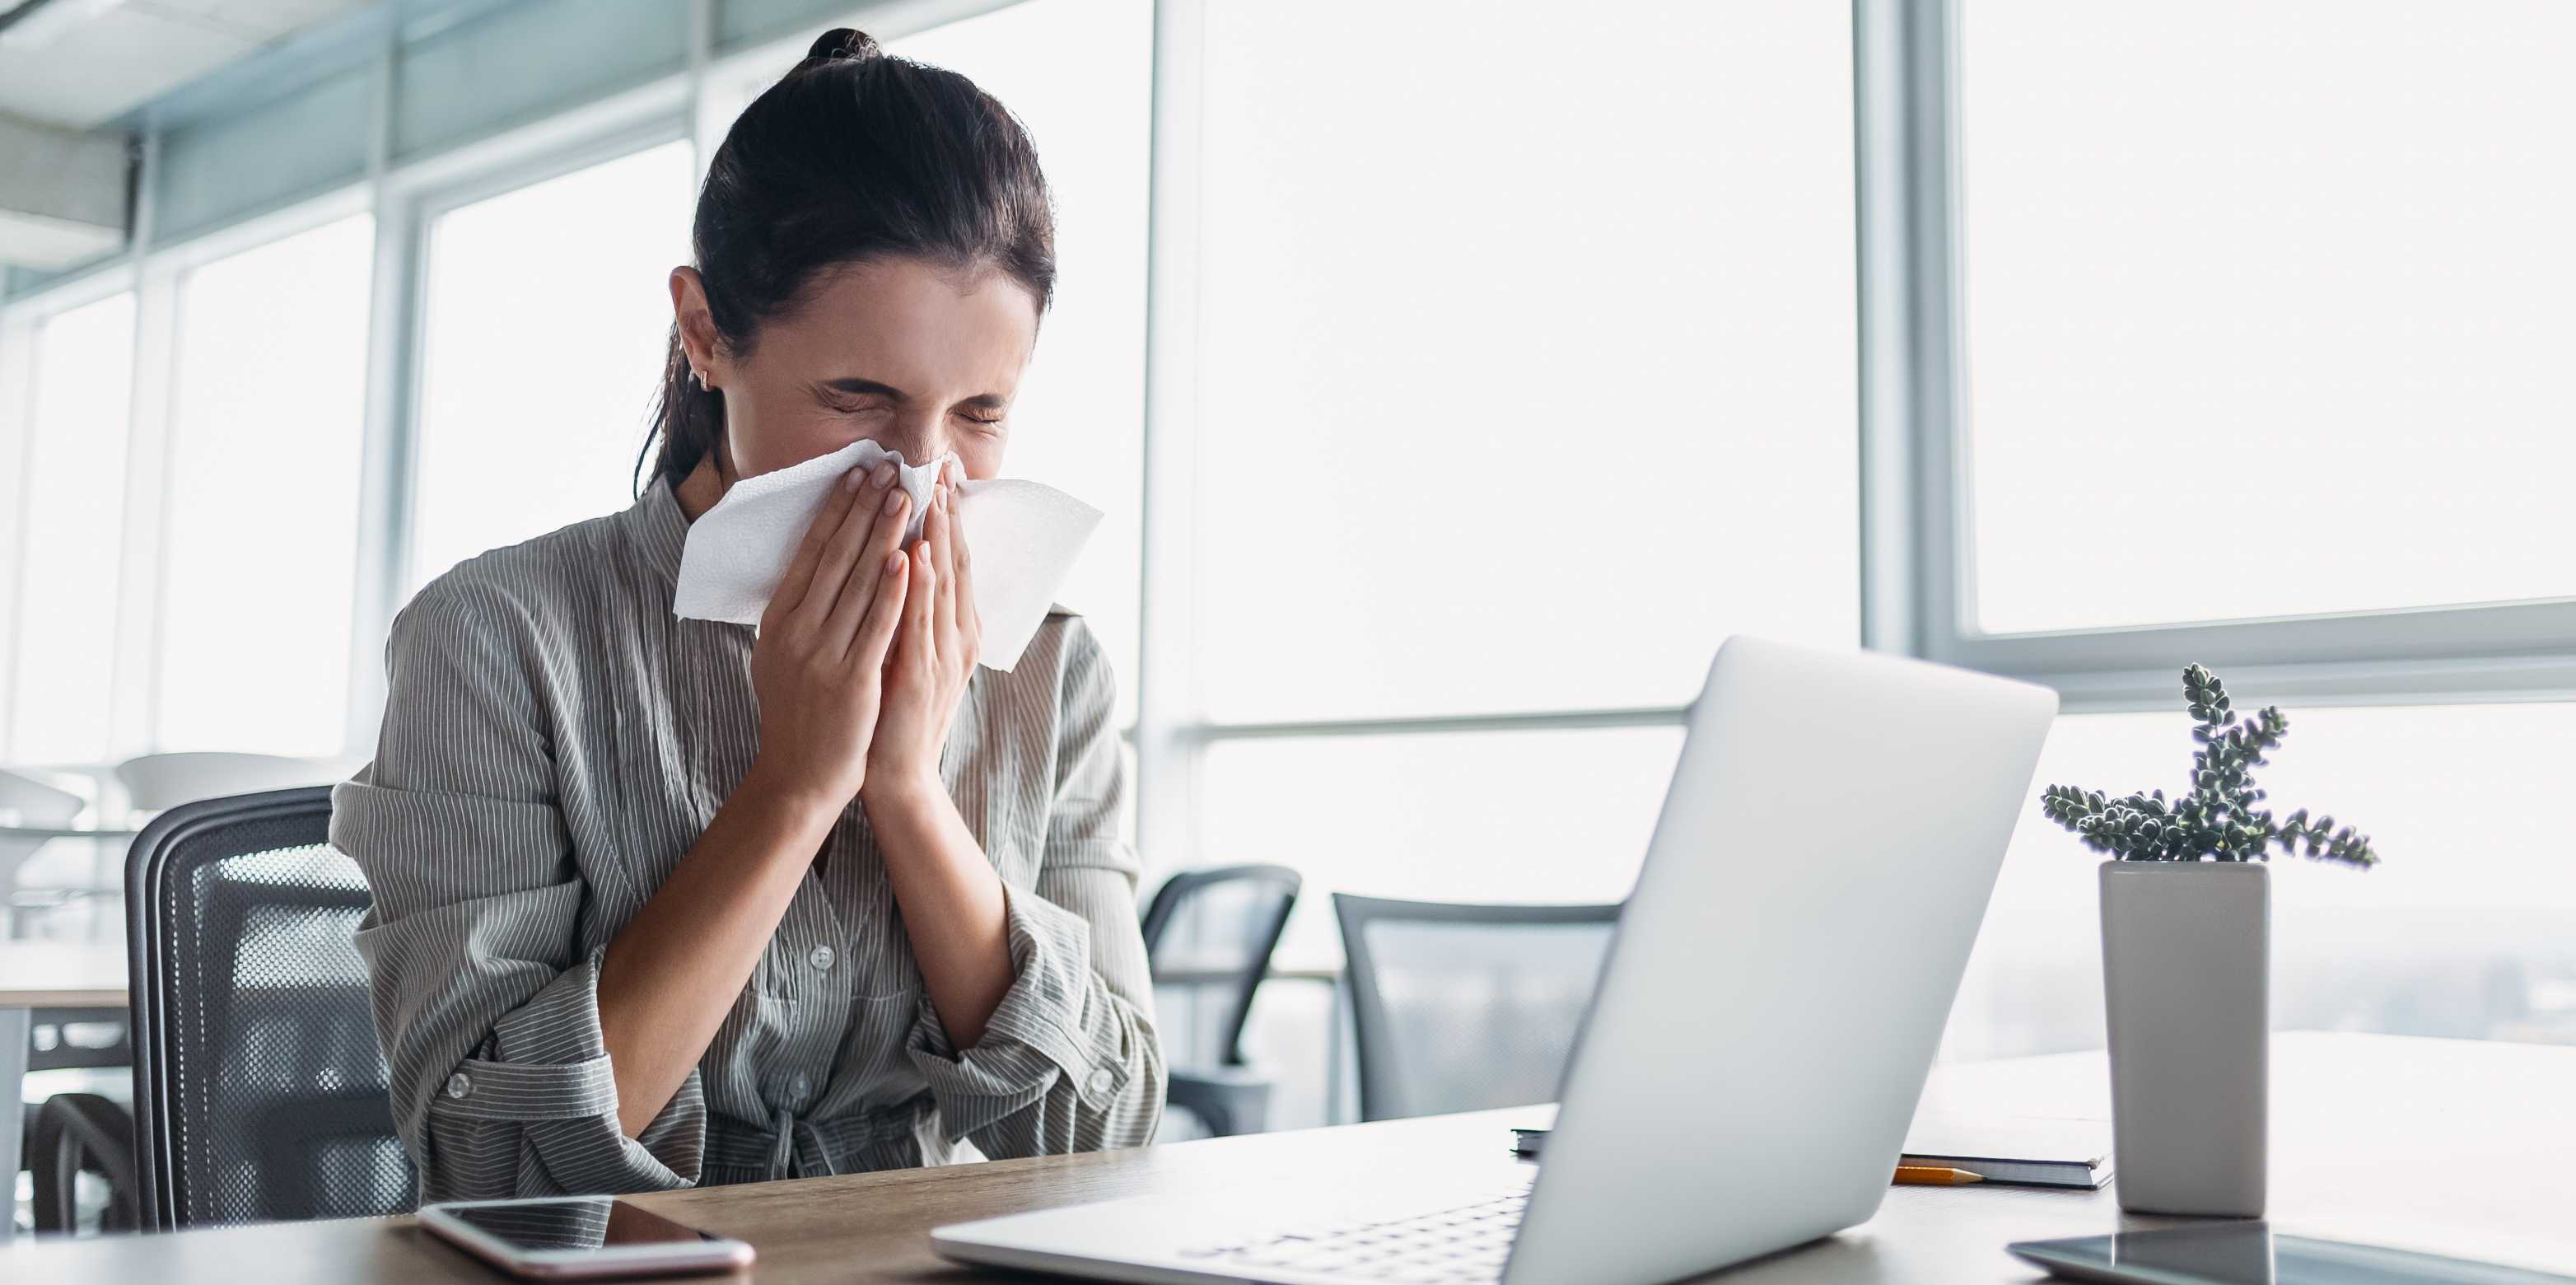 A woman sits in front of a laptop and blows her nose.